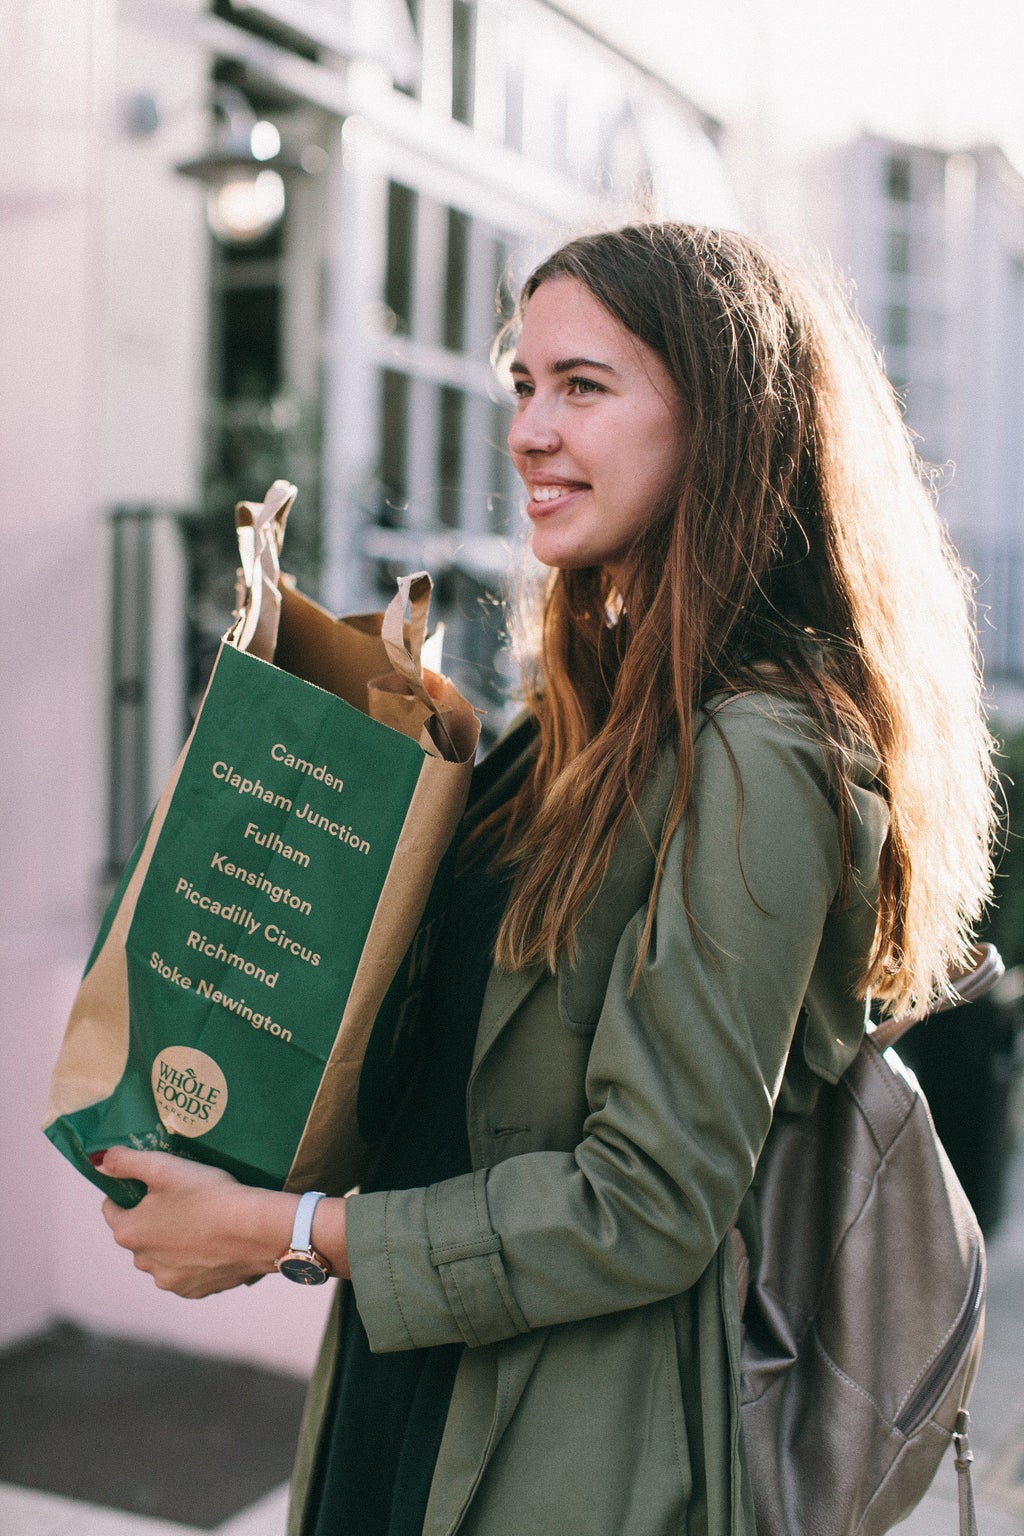 woman holding grocery bag whole foods